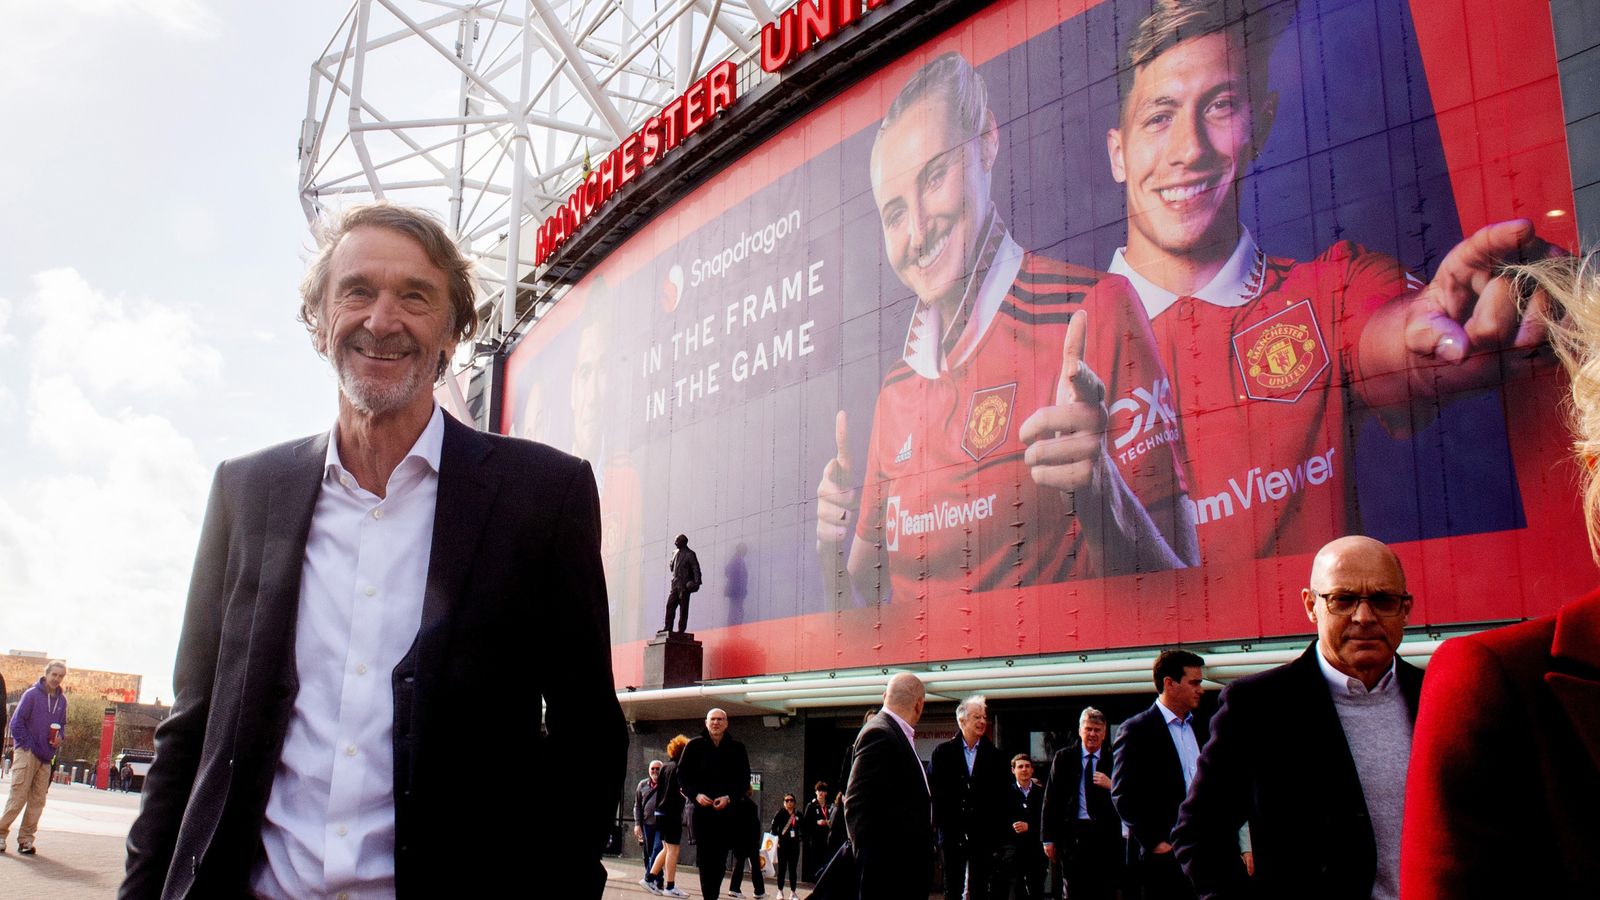 Sir Jim Ratcliffe to buy 25% of Manchester United for £1.3bn